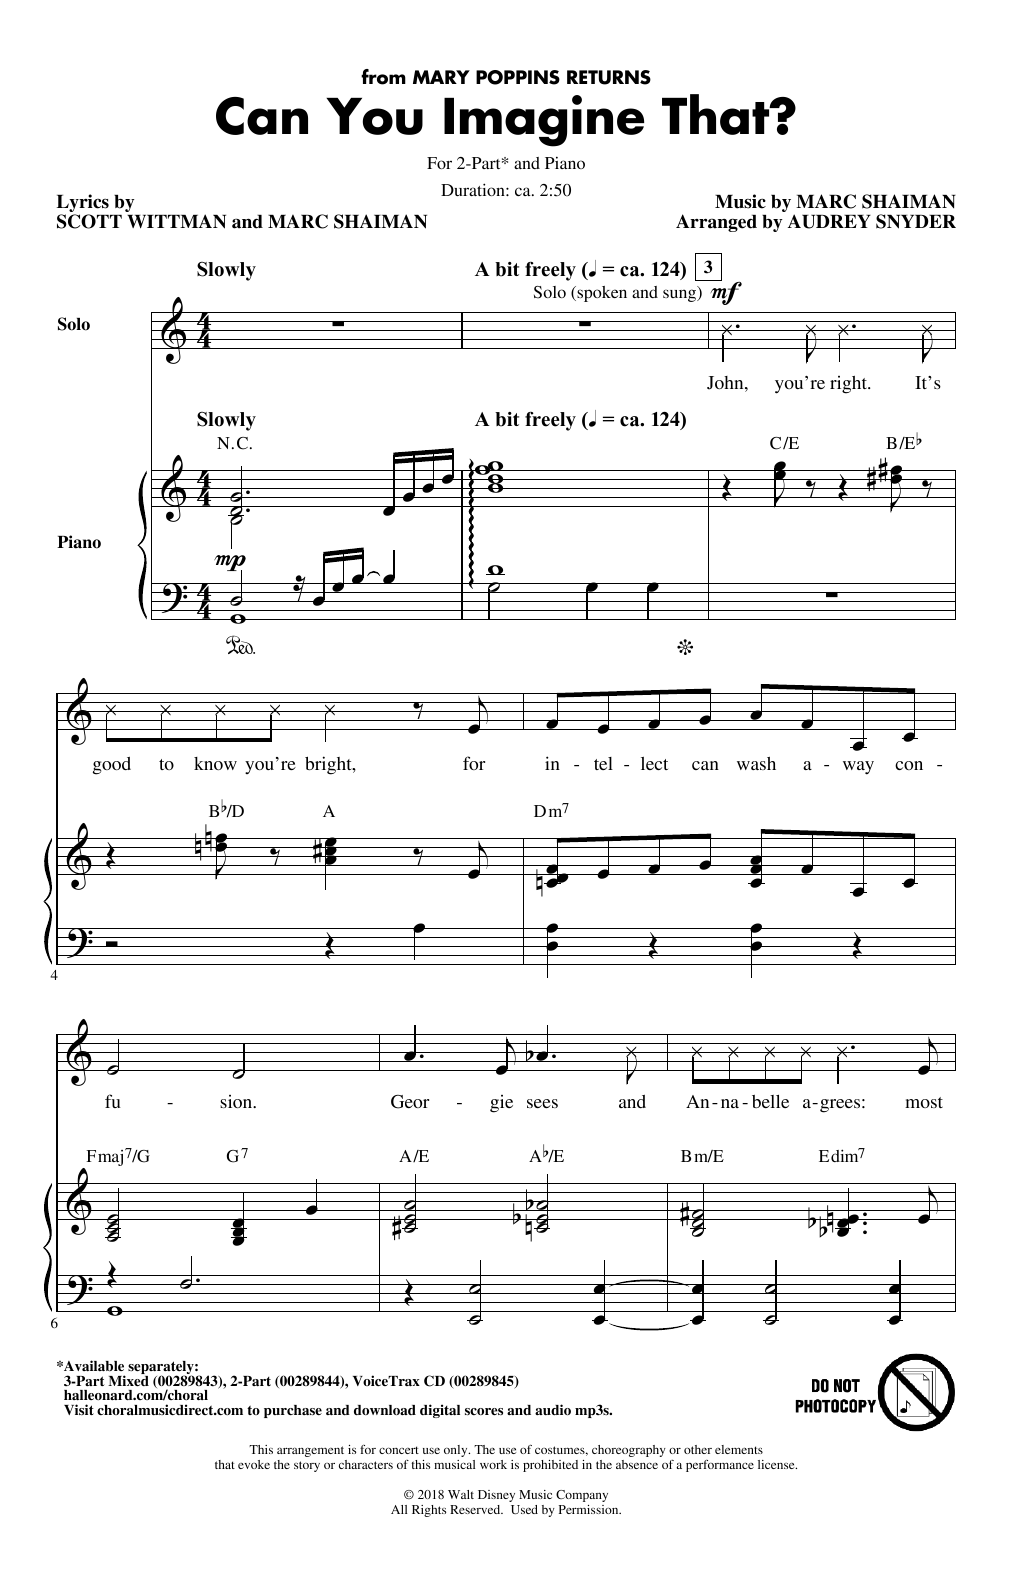 Can You Imagine That? (from Mary Poppins Returns) (arr. Audrey Snyder) sheet music